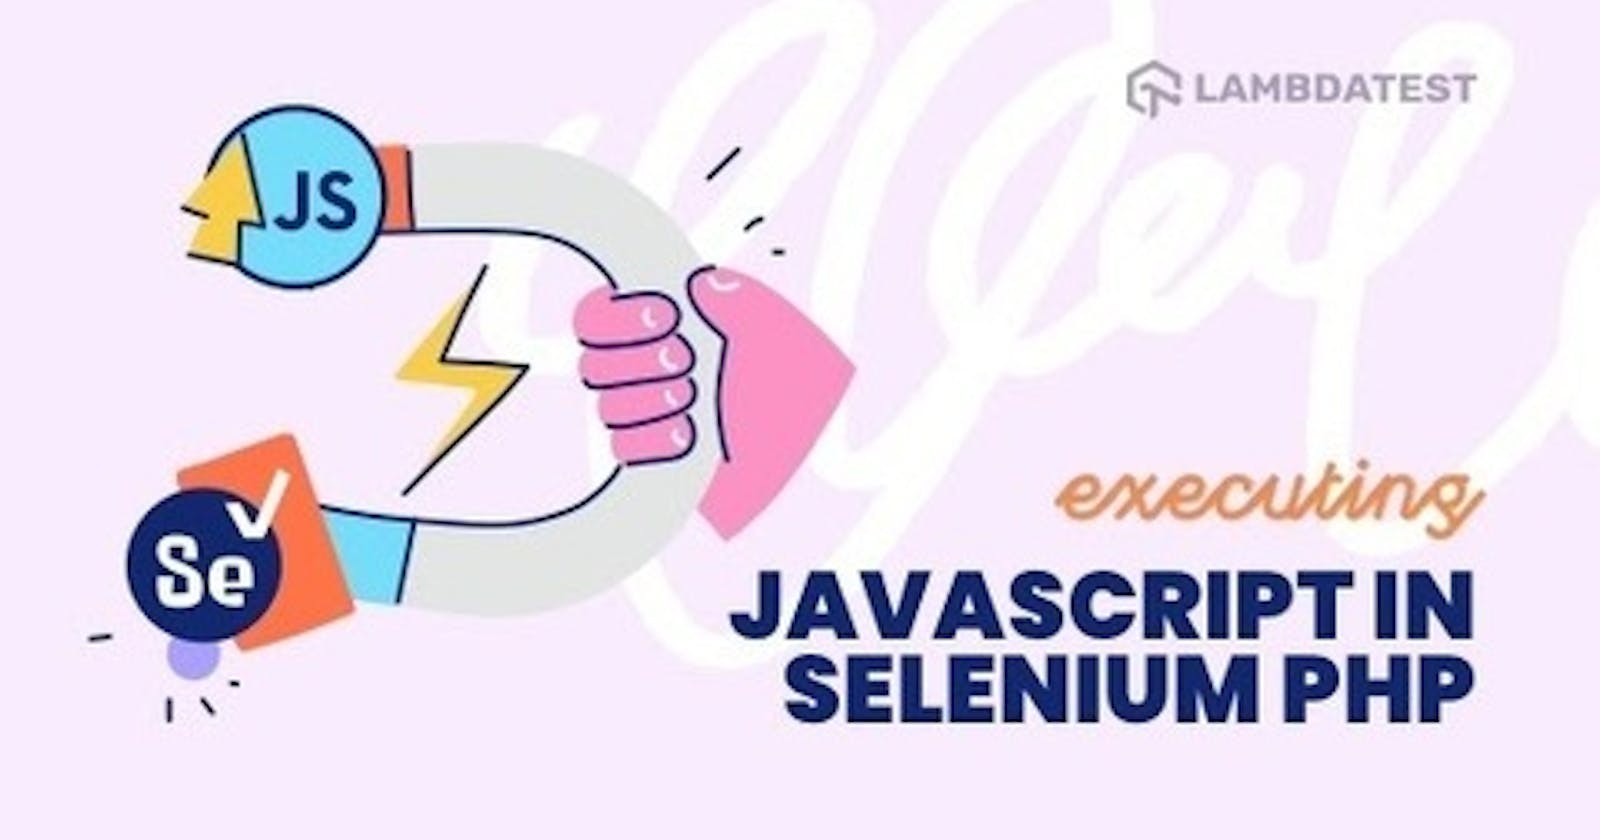 How To Execute JavaScript In Selenium PHP?